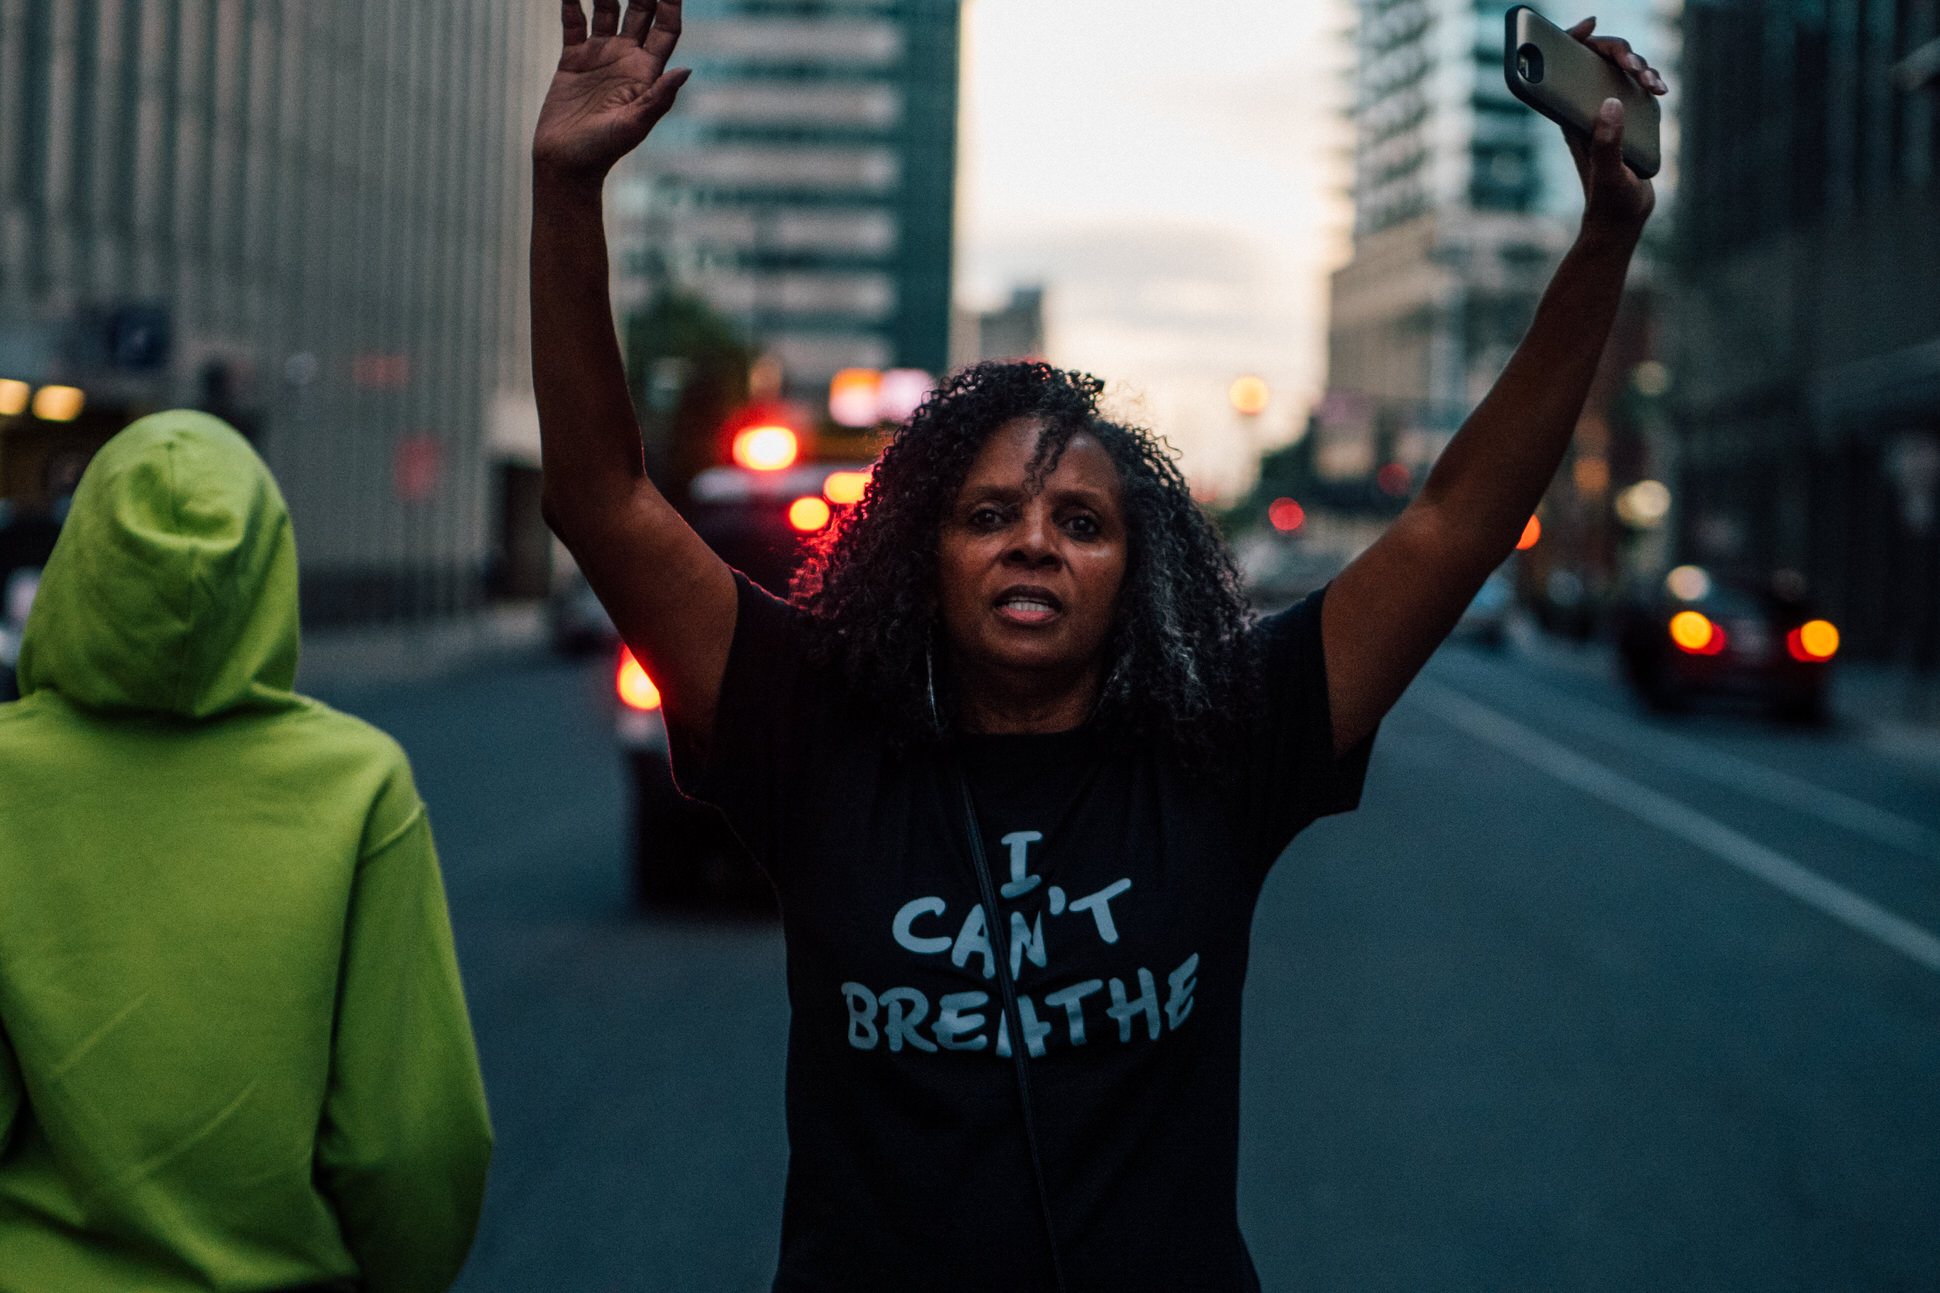 A woman puts her hands up, a gesture that has become synonymous with the Black Lives Matter movement as participants of the BLM 5280 march chant "Hands up don’t shoot".